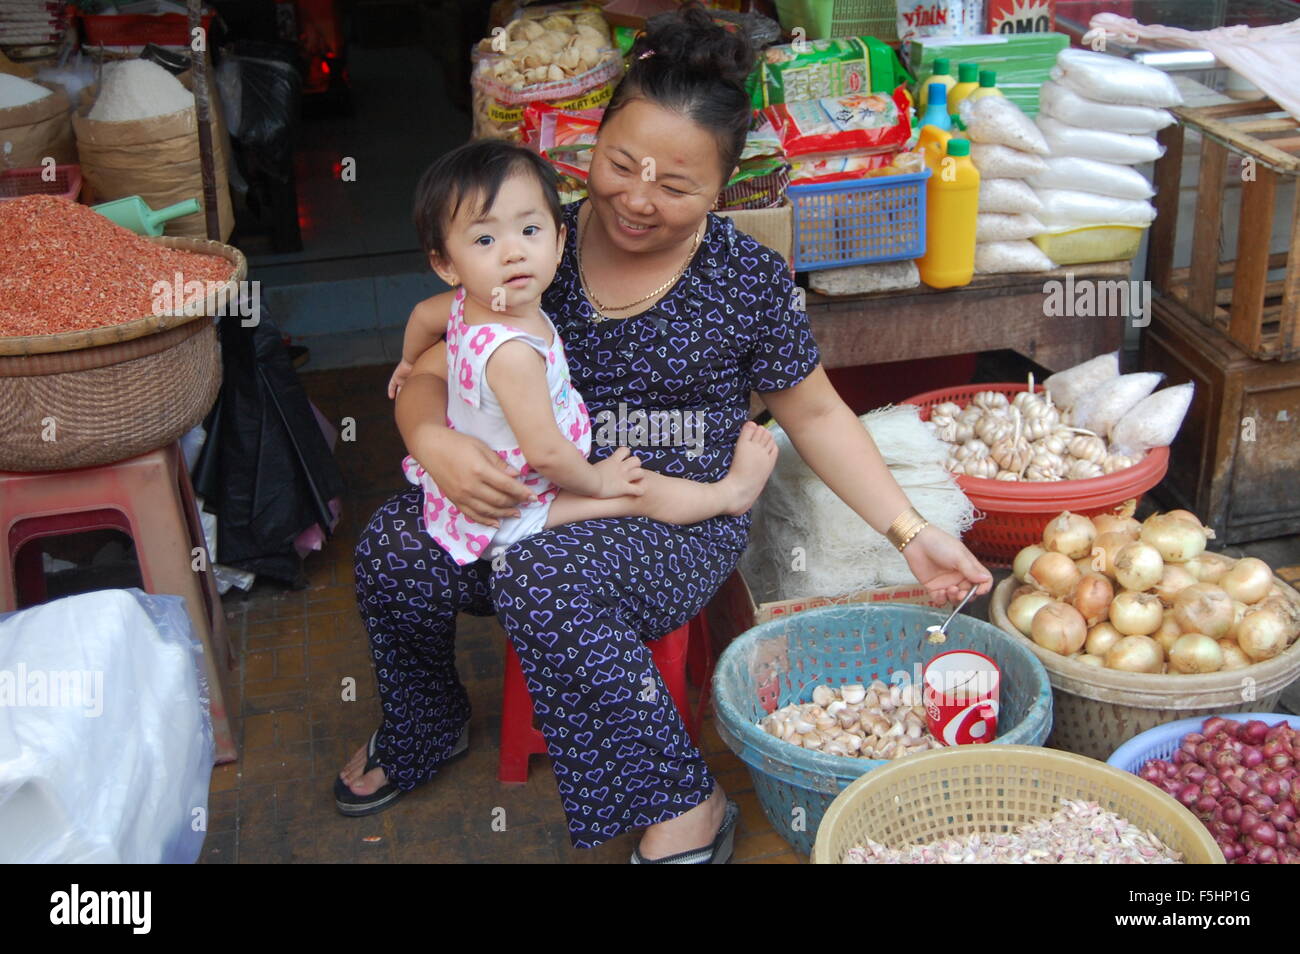 Woman and baby in Vietnamese market Stock Photo